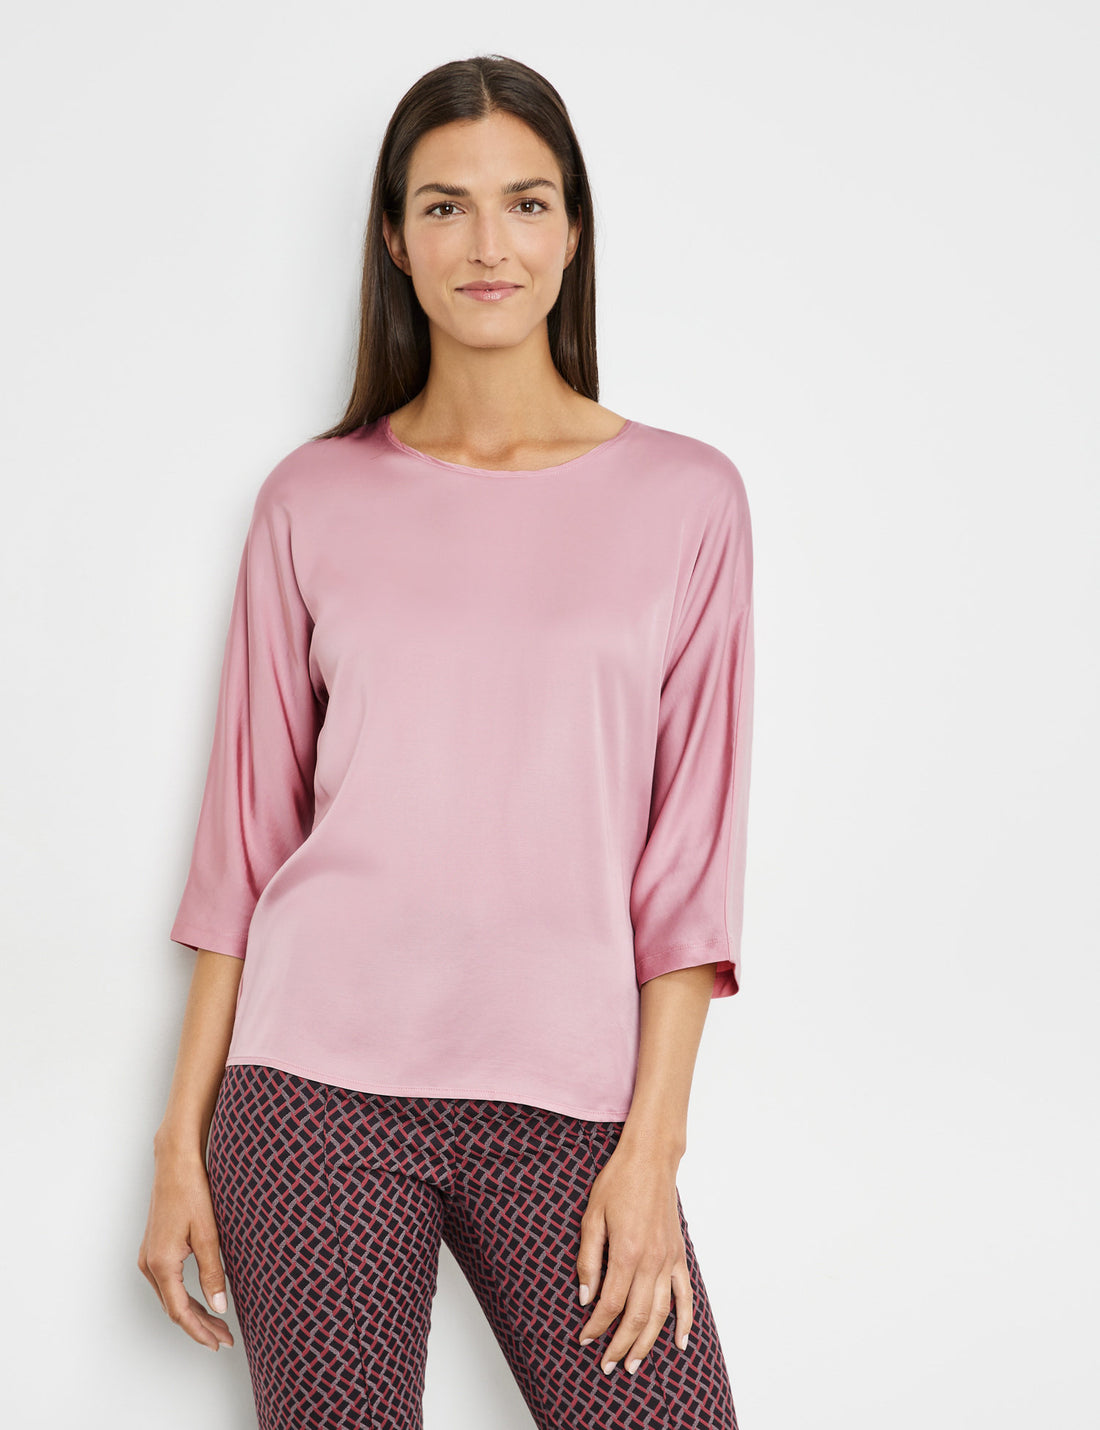 3/4 Sleeve Top With A Fabric Panel And A Subtle Sheen_270229-35033_30907_01